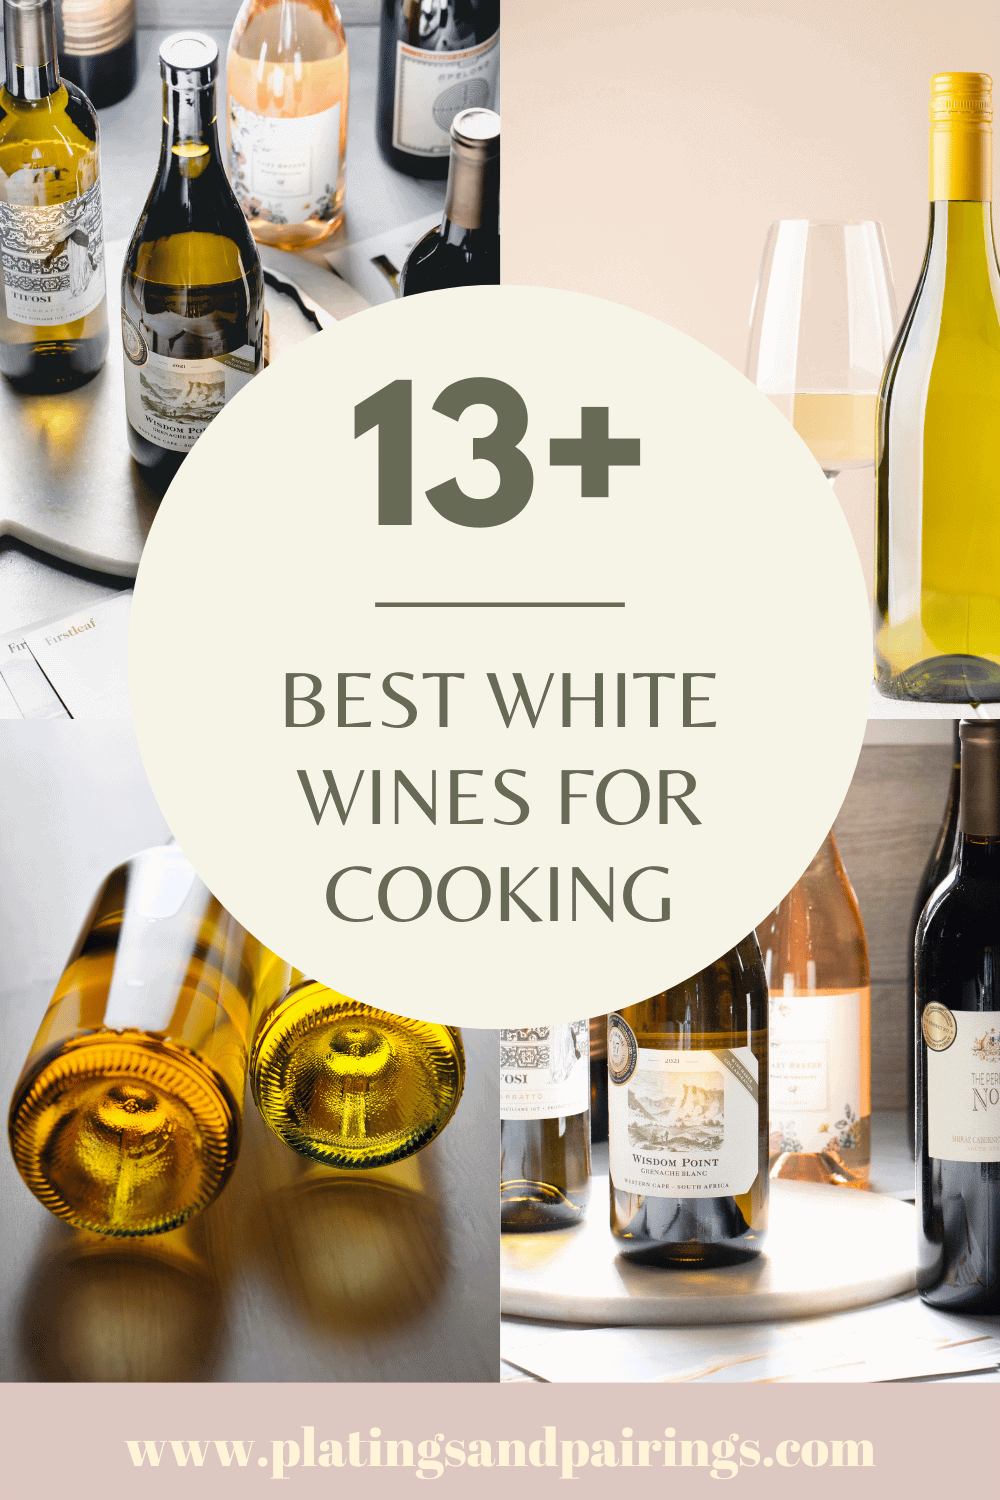 Collage of white wines for cooking with text overlay.